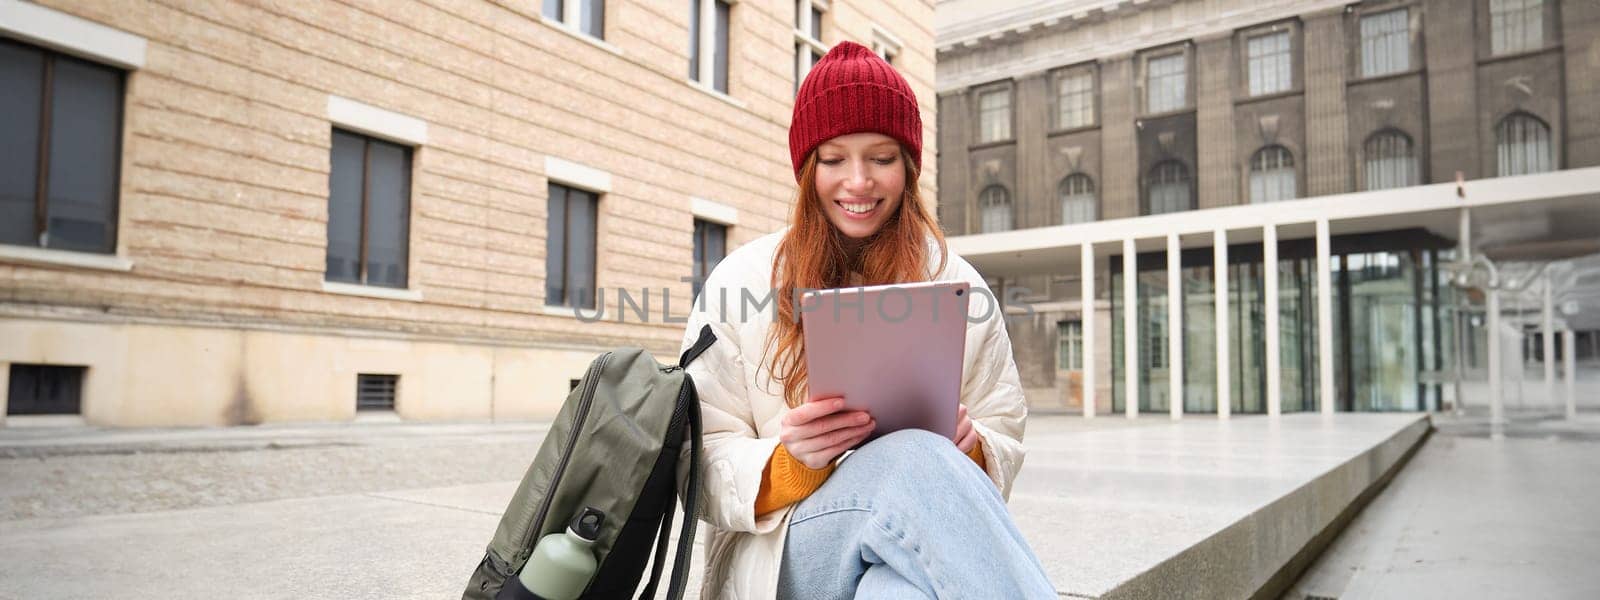 Redhead girl smiles, sits outdoors near building with digital tablet, thermos and backpack, connects to public internet and searches smth online on her gadget.